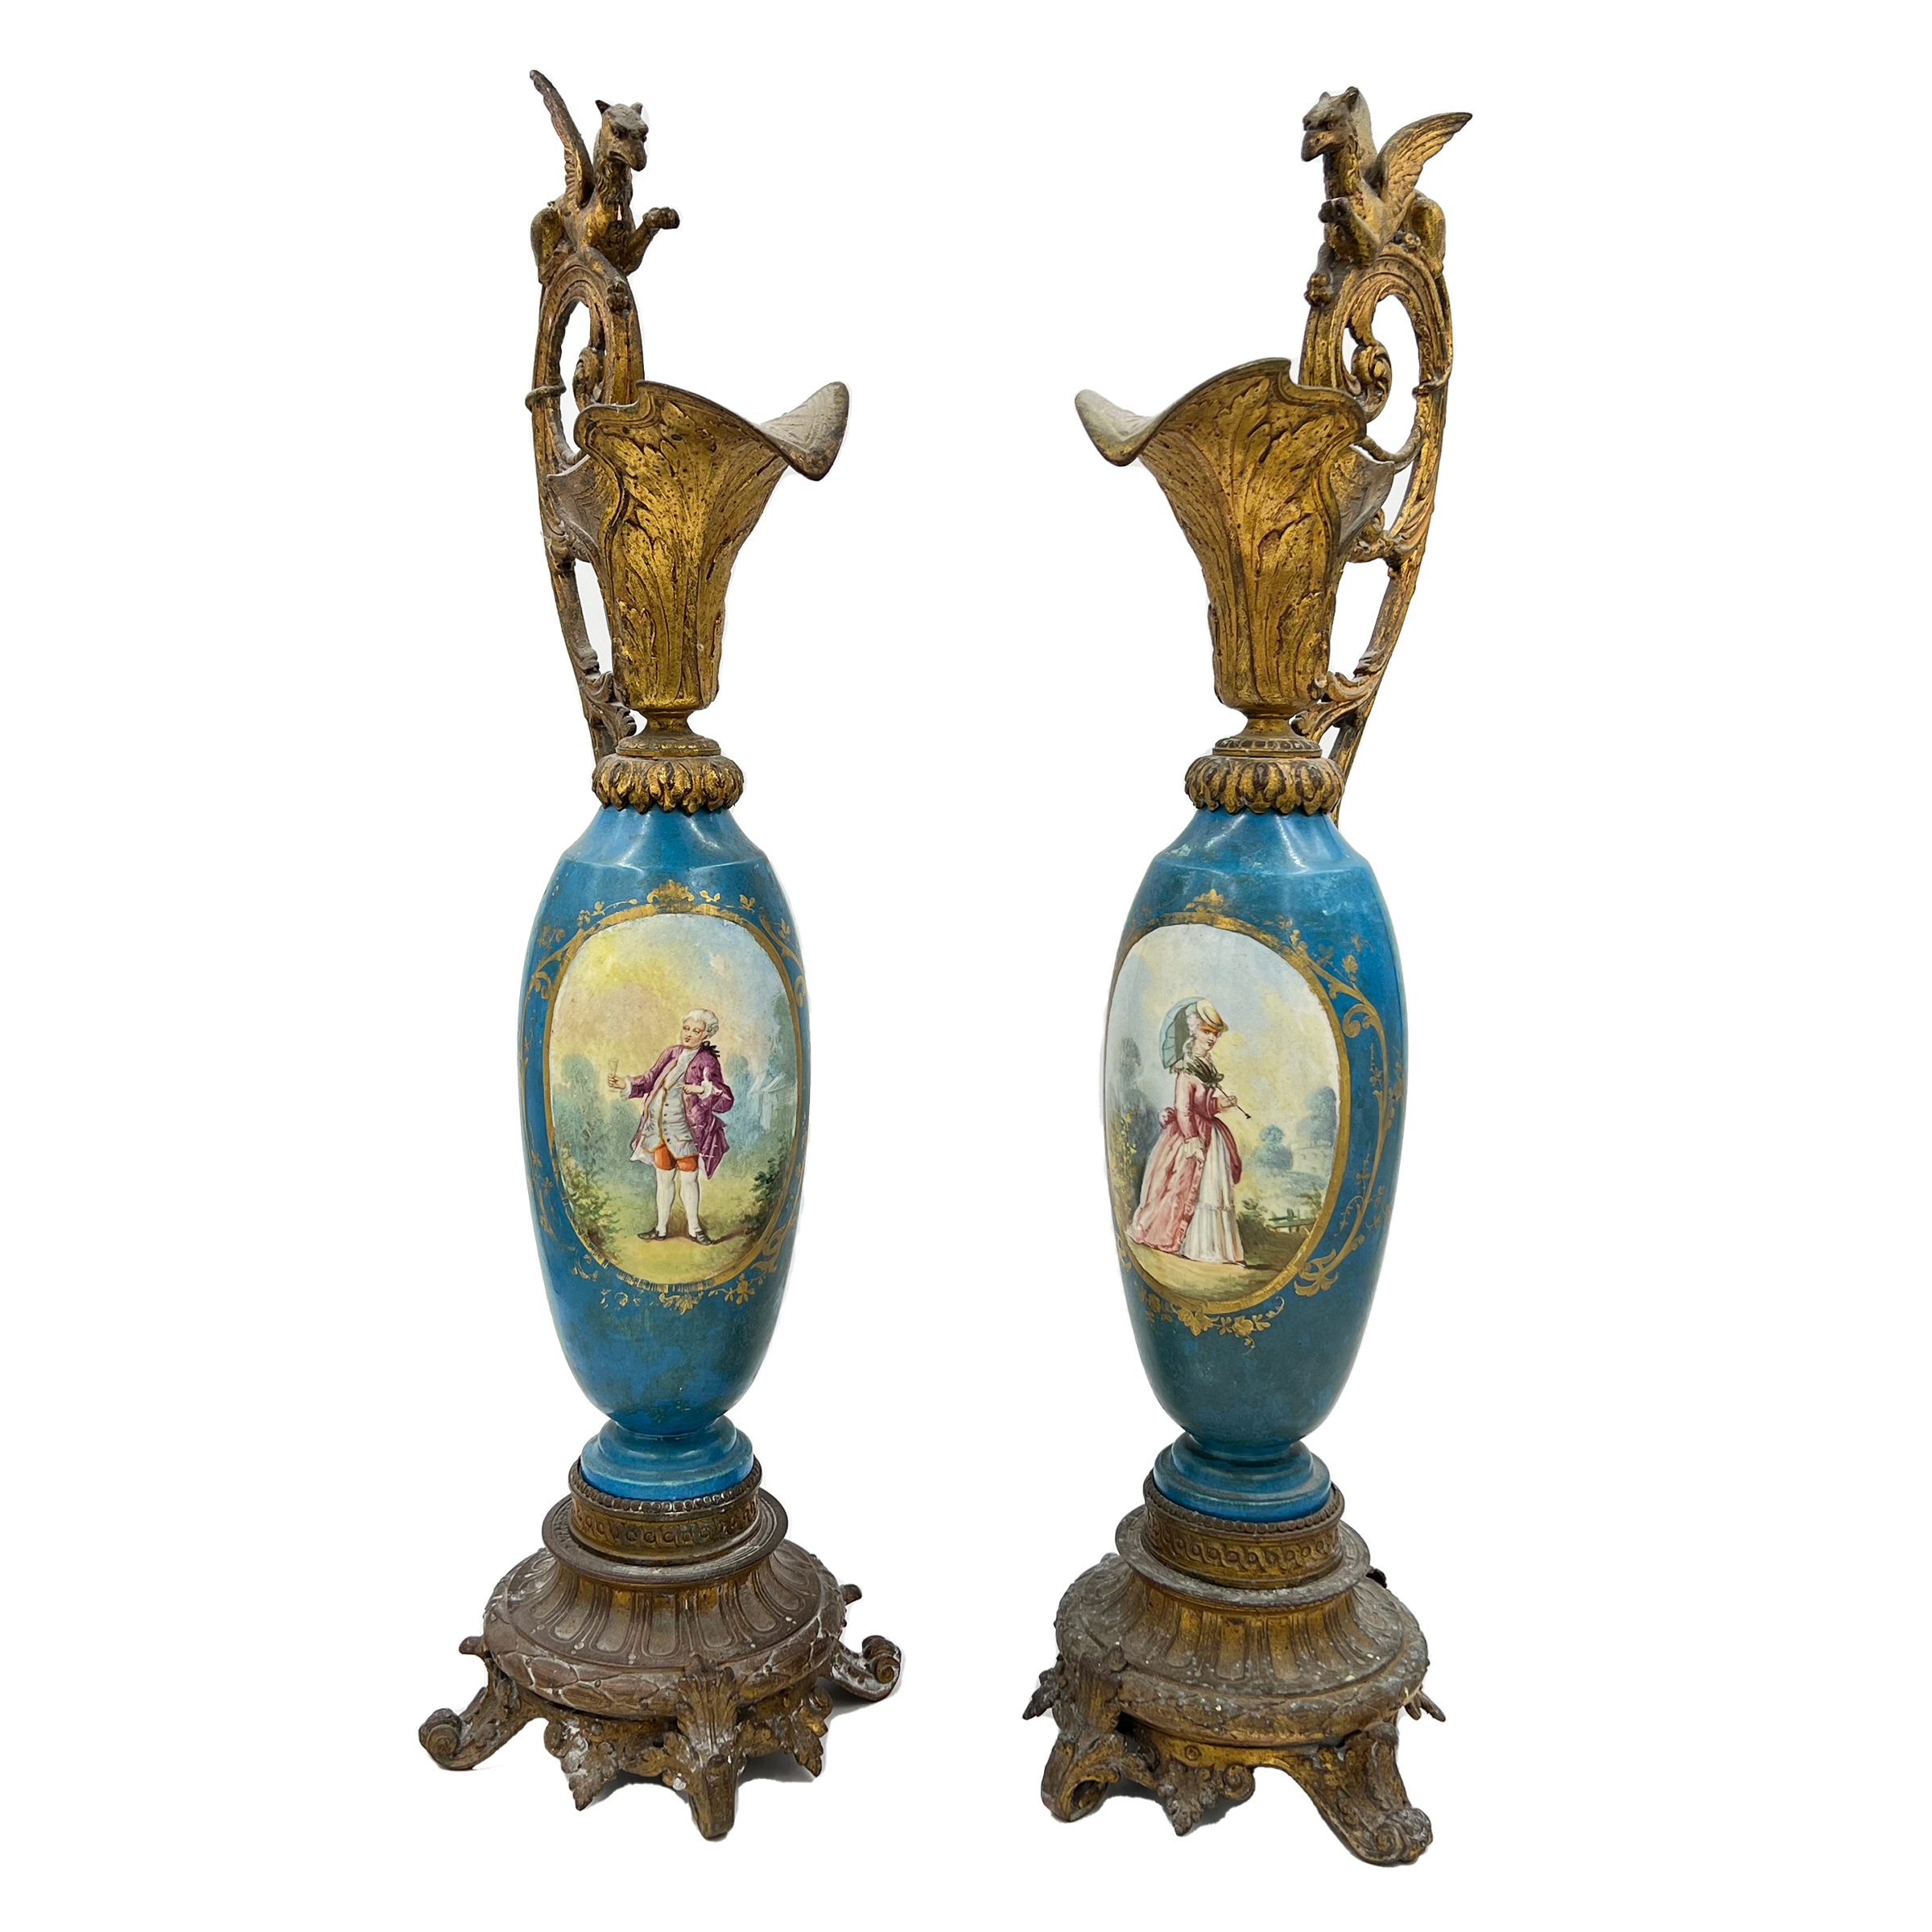 PAIR OF SEVRES STYLE PORCELAIN WITH METAL MOUNTING EWER/VASES